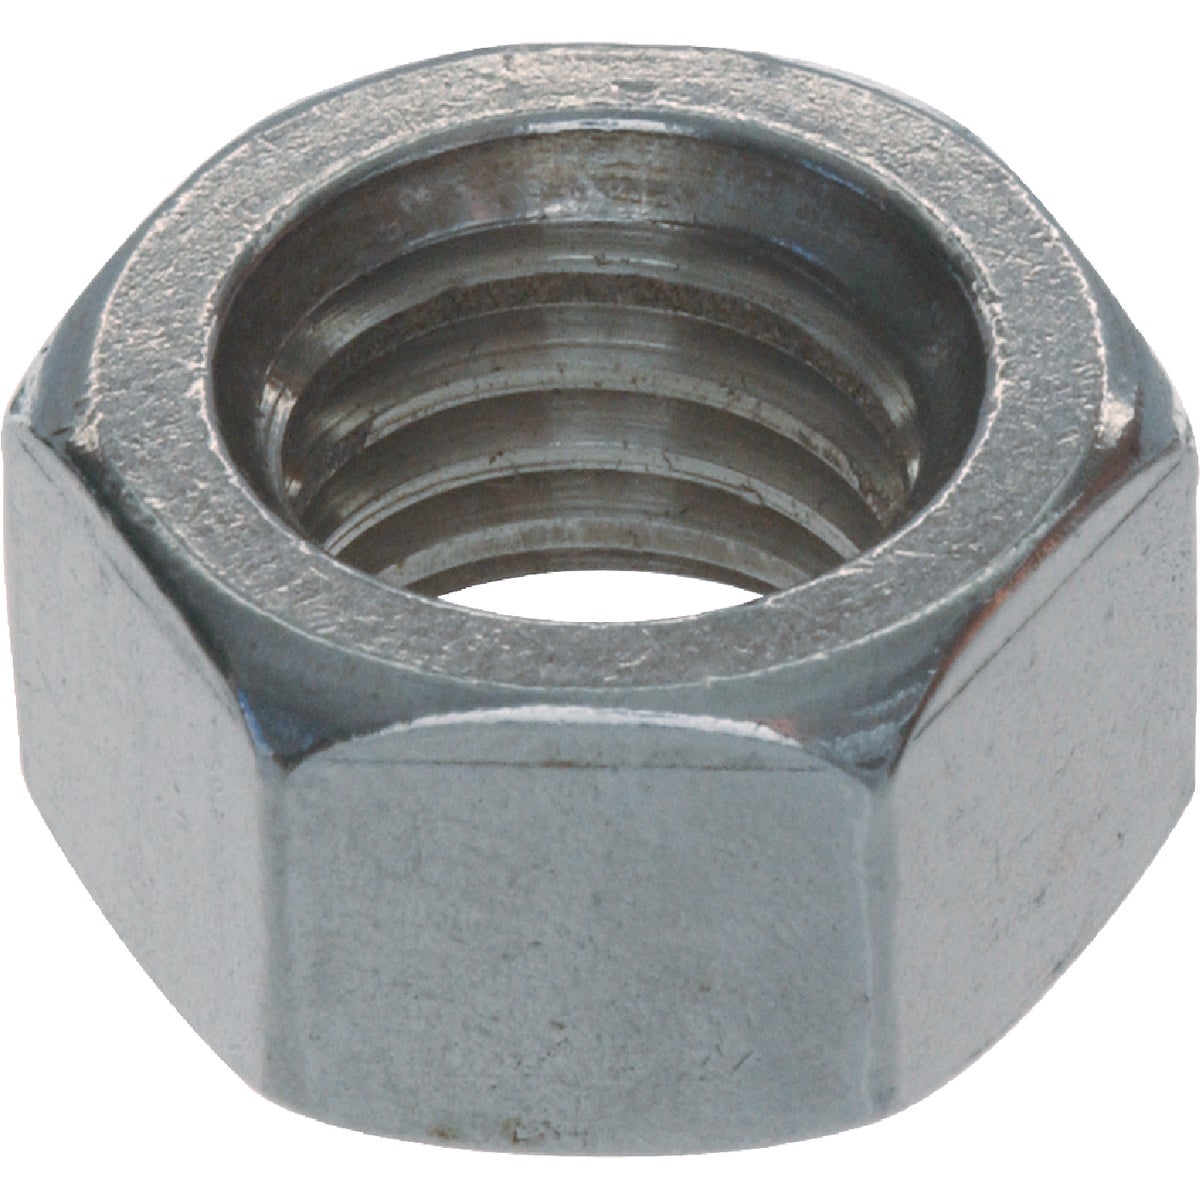 Item 726249, Hex nuts are to be used with machine bolts to adhere facing materials to 